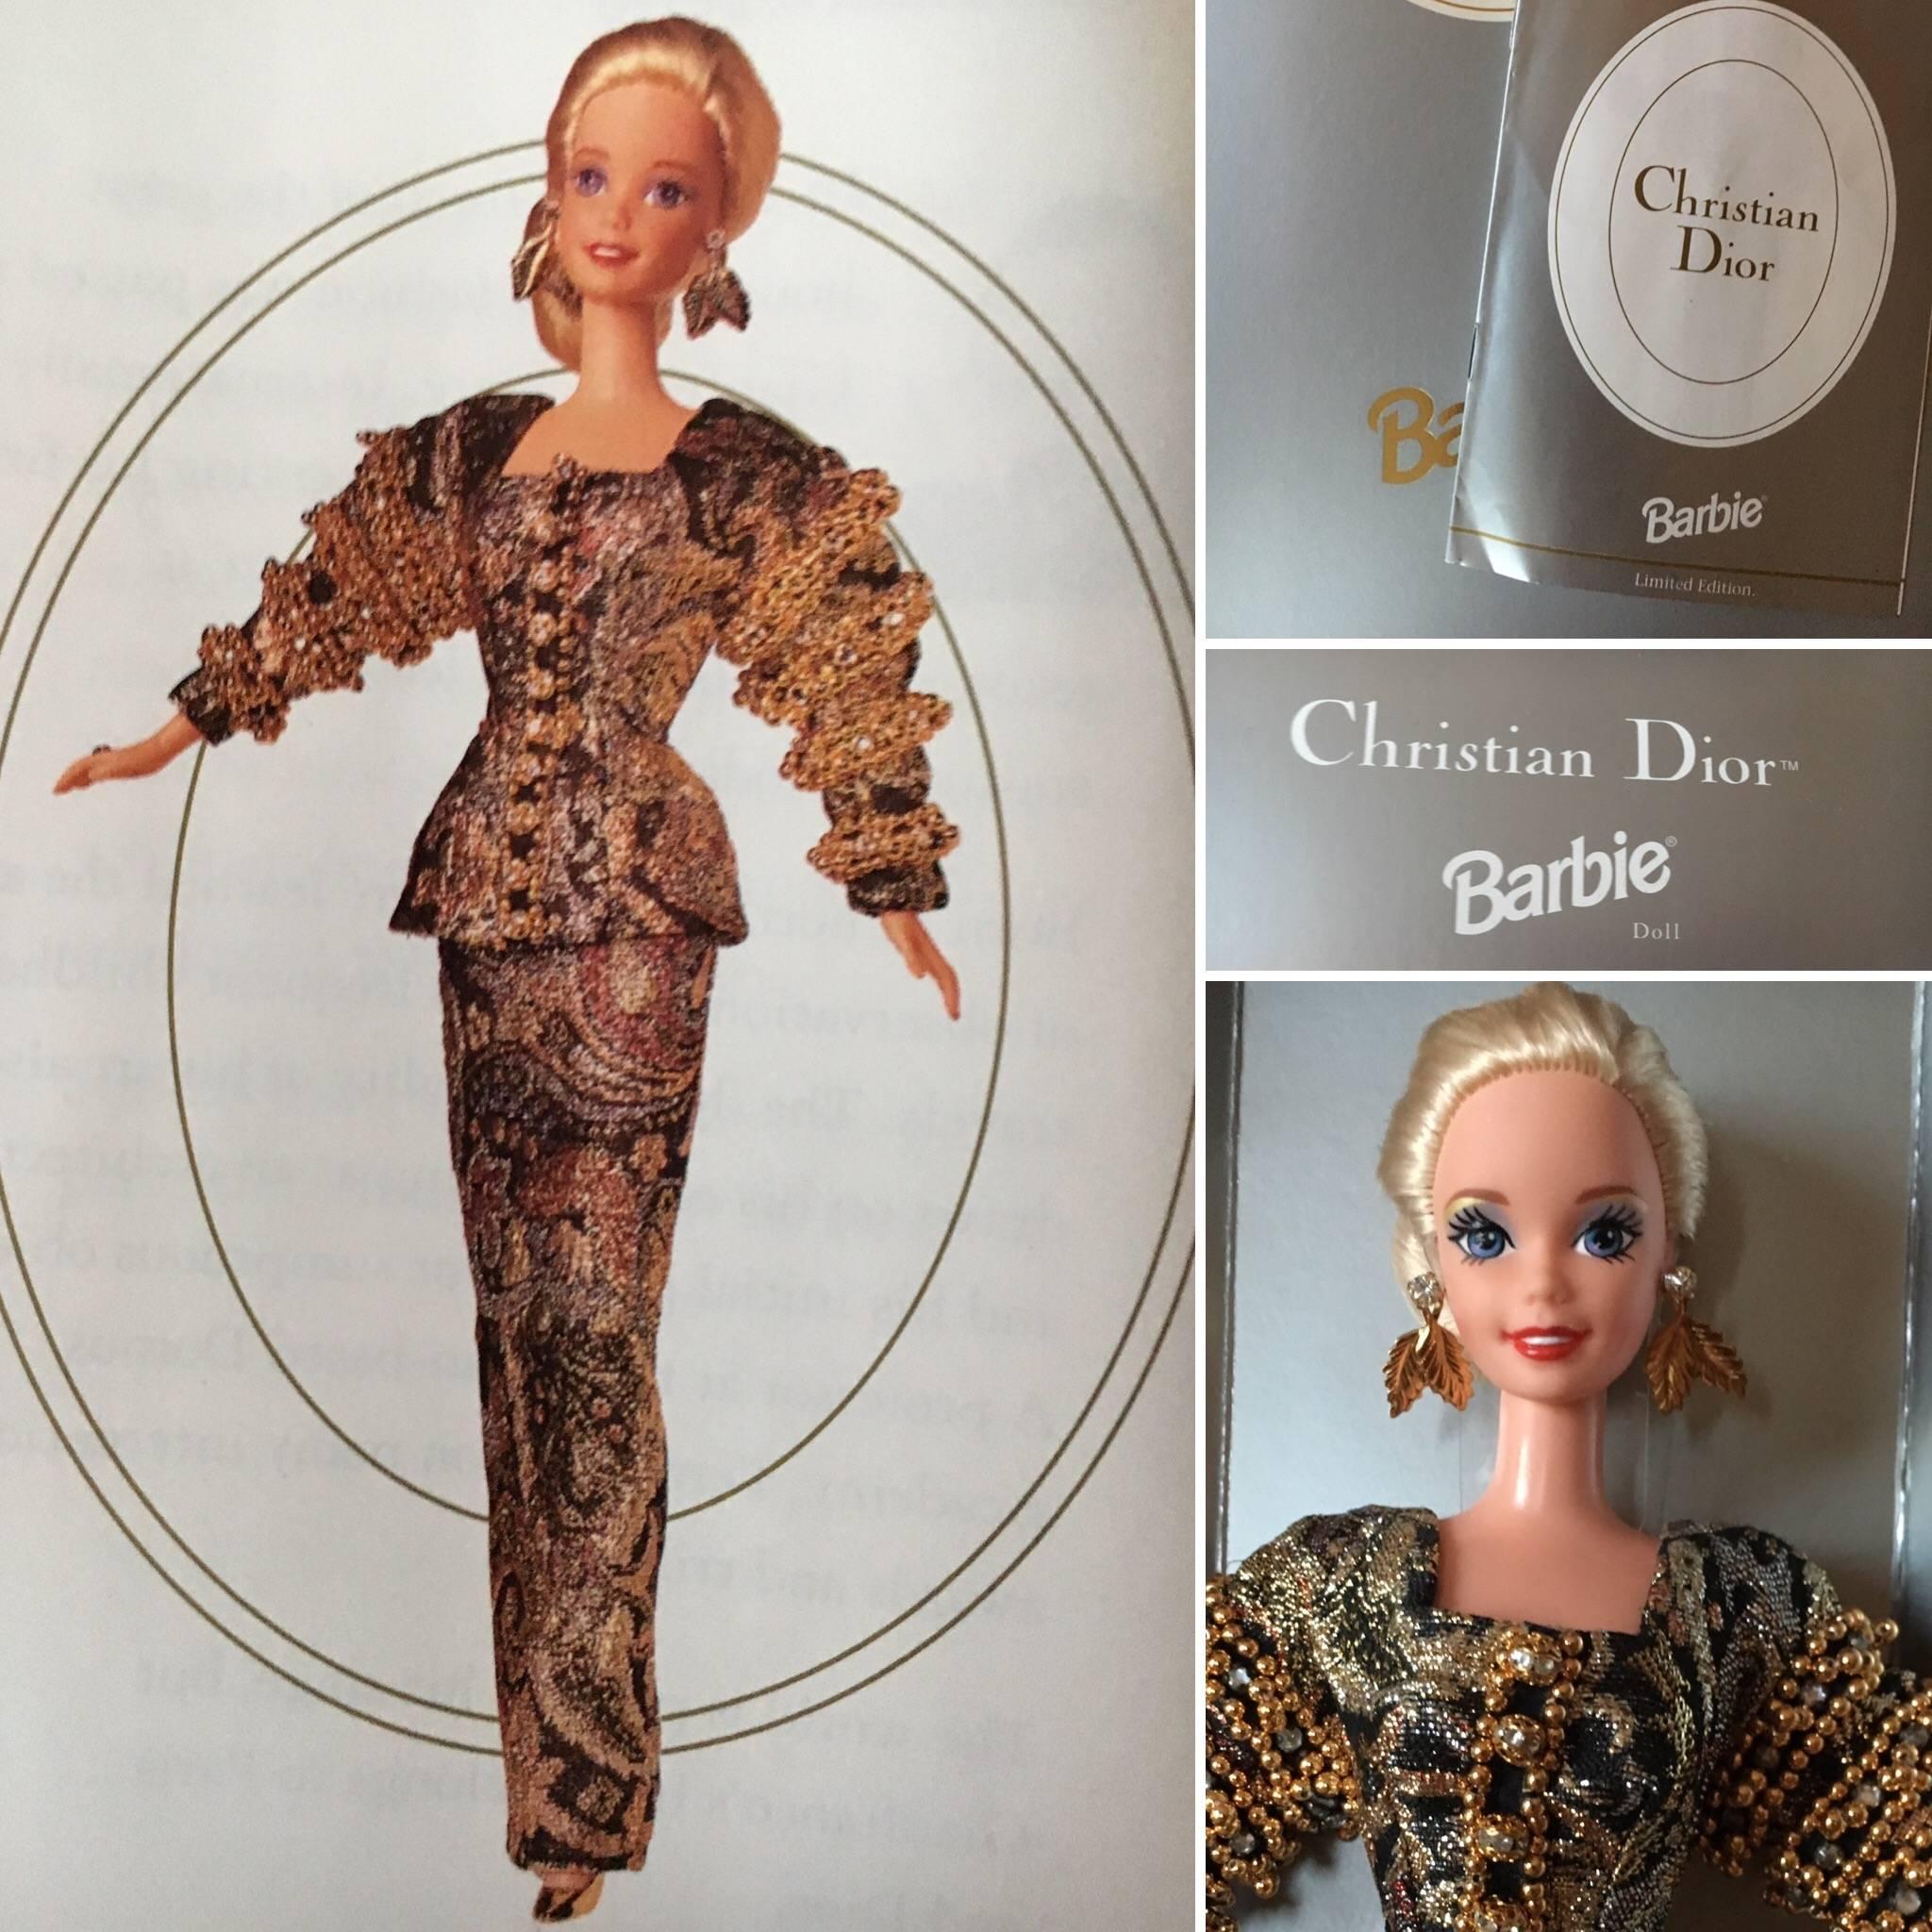 Christian Dior 1993 Haute Couture Barbie Doll by Gianfranco Ferre New in Box.
Created in collaboration with Christian Dior , this design is a replica of a Dior Haute Couture dress by Gianfranco Ferre.
So chic with her hair in a chignon,  Barbie